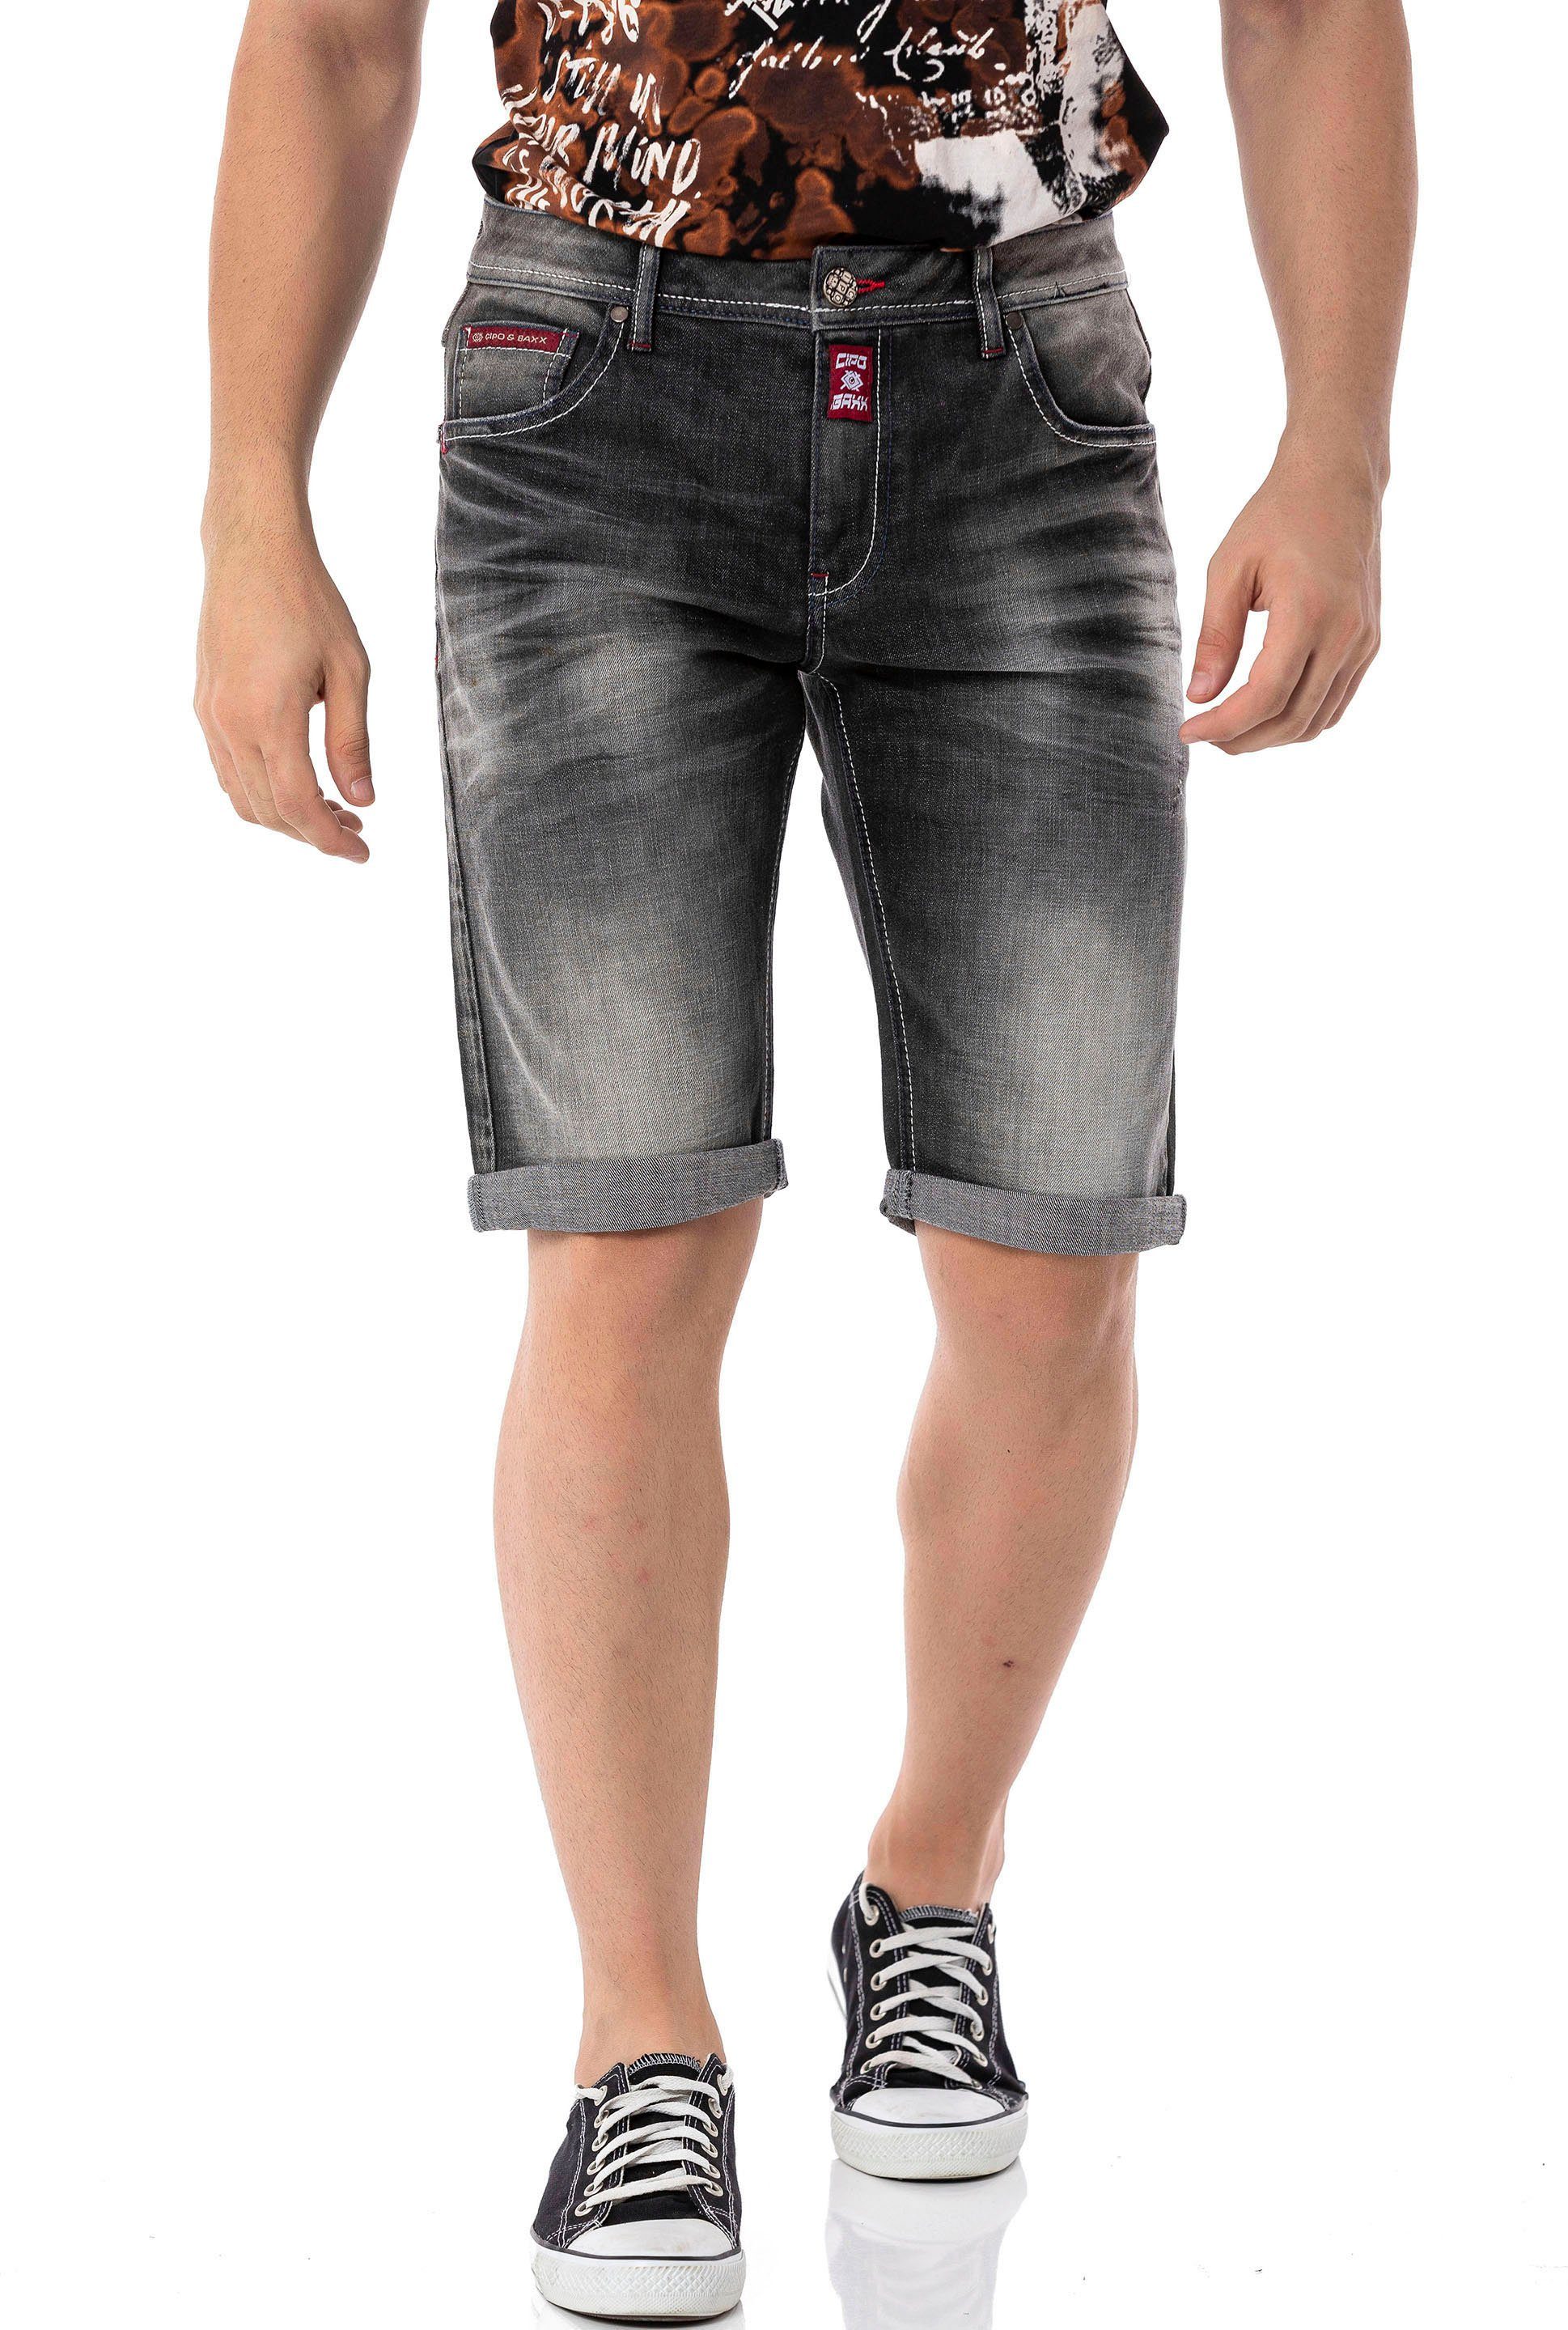 Cipo & Jeansshorts Baxx used black